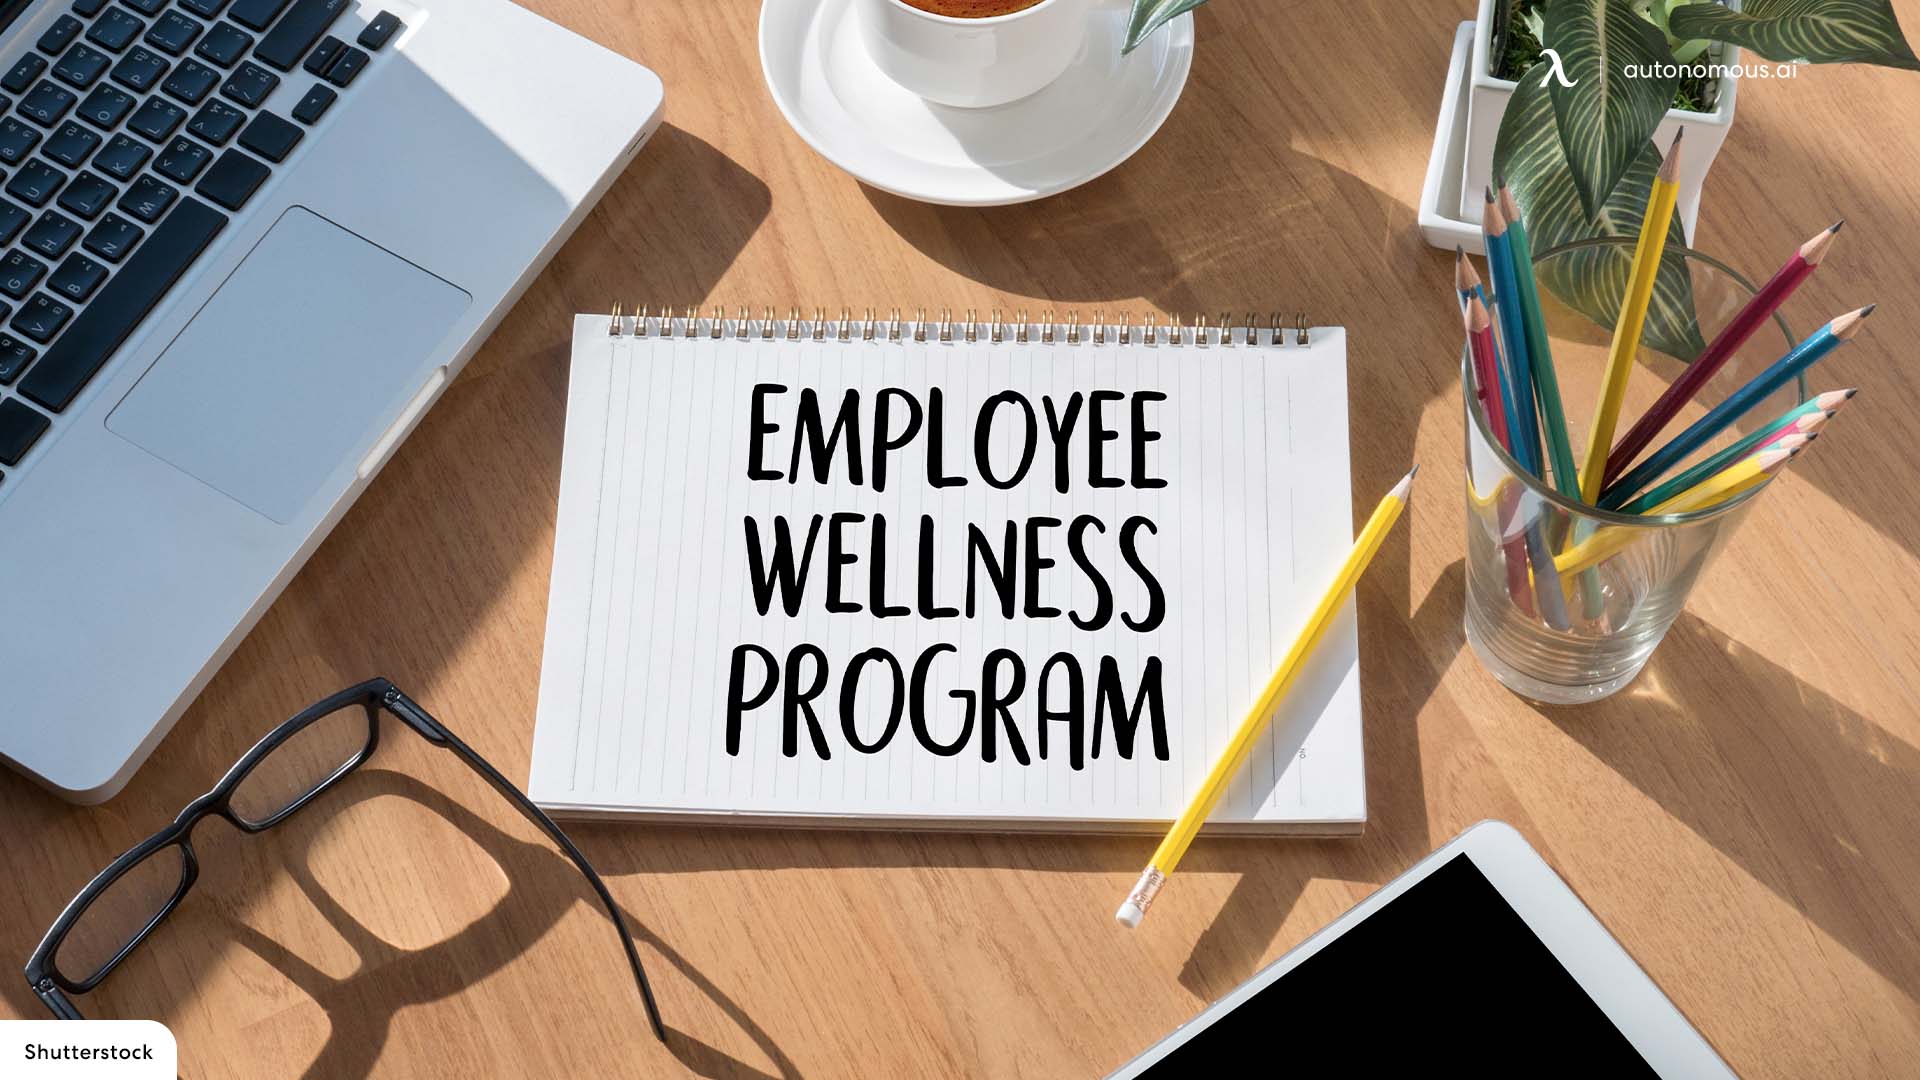 Simple Steps to Set up an Efficient Employee Benefits Program